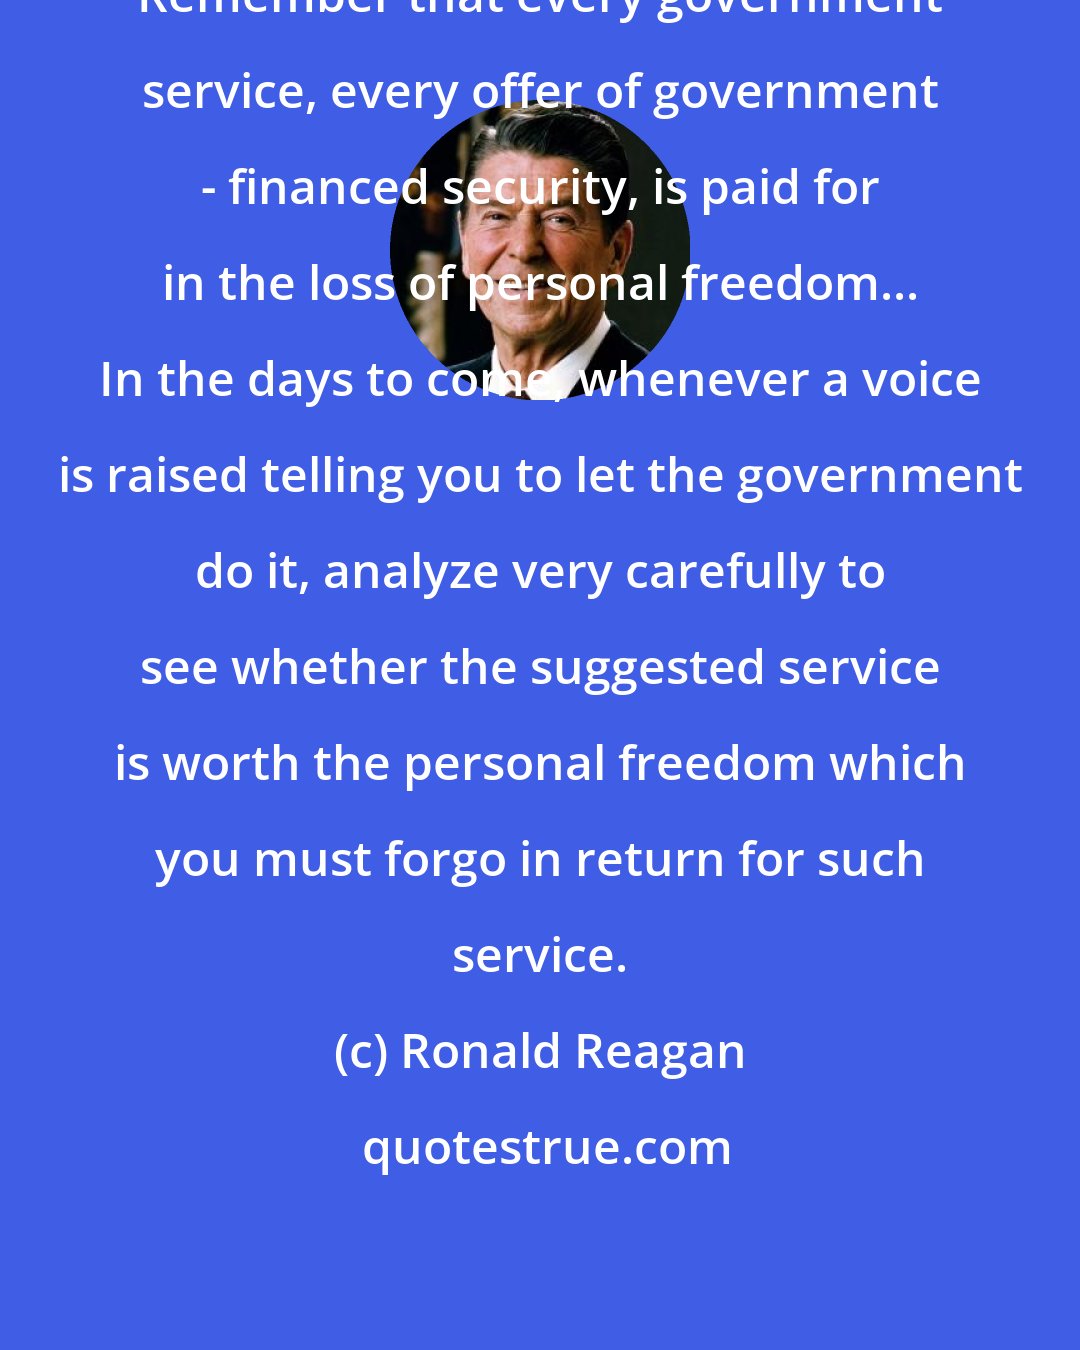 Ronald Reagan: Remember that every government service, every offer of government - financed security, is paid for in the loss of personal freedom... In the days to come, whenever a voice is raised telling you to let the government do it, analyze very carefully to see whether the suggested service is worth the personal freedom which you must forgo in return for such service.